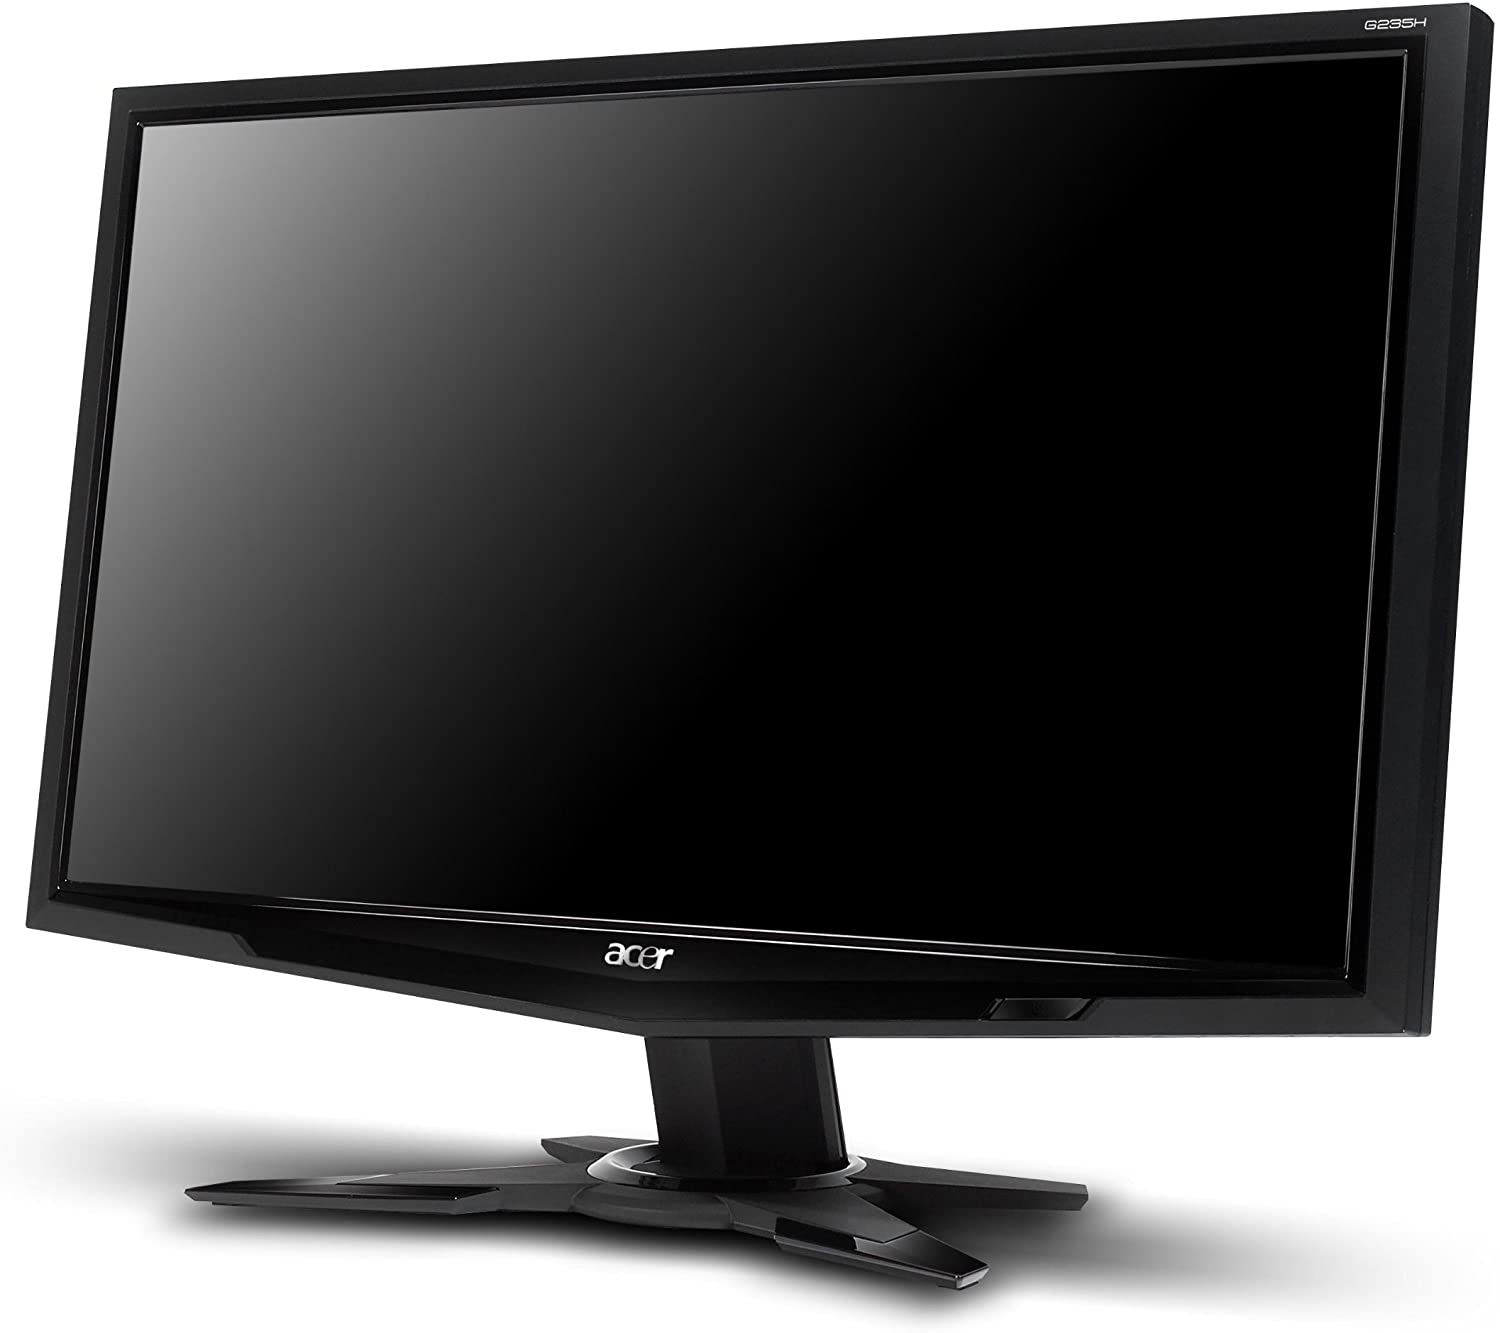 Acer G235H Abd 23-Inch Screen LCD Monitor